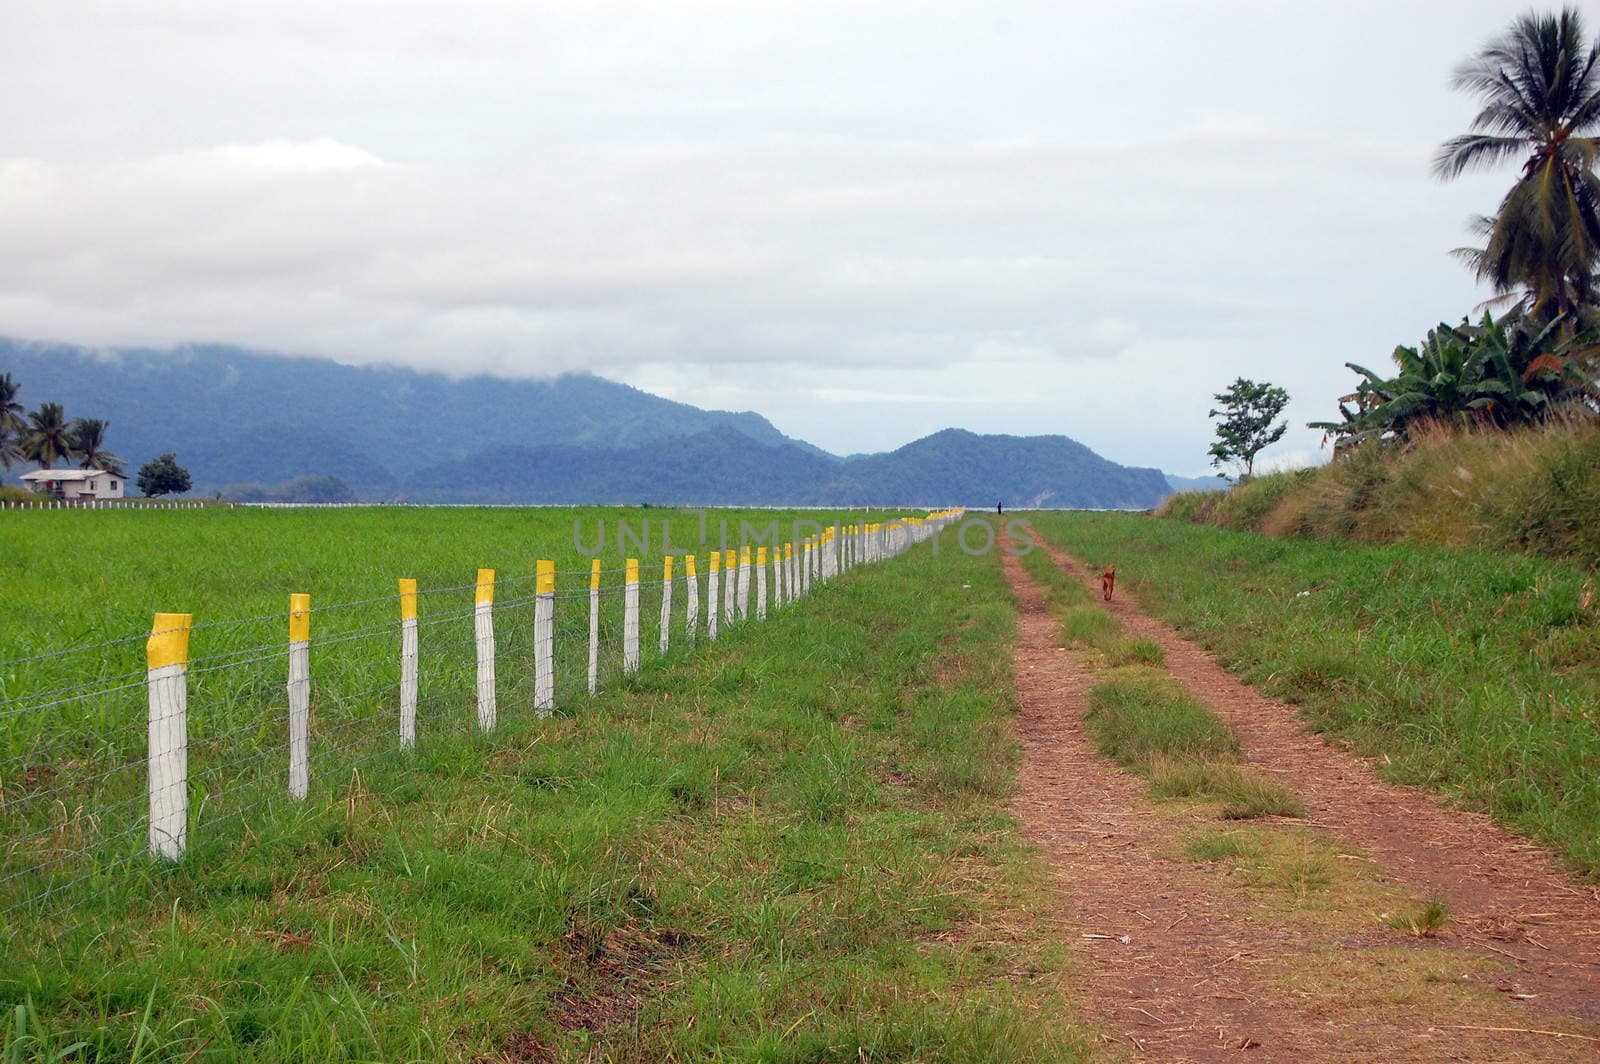 Gravel road along airfield fence, Papua New Guinea